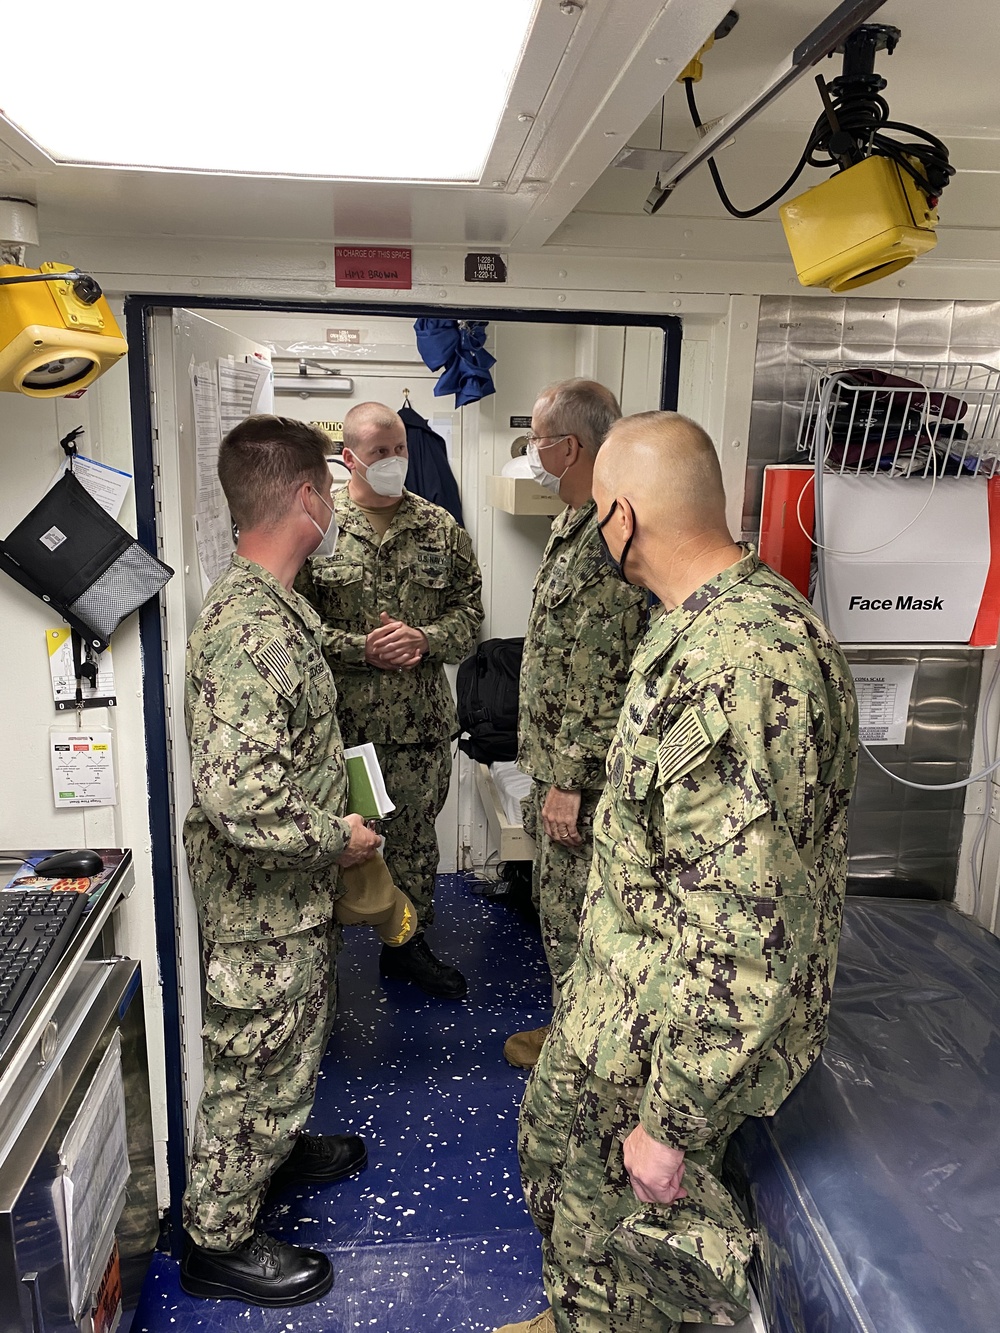 DVIDS - Images - USS Cole Medical Spaces [Image 3 of 11]